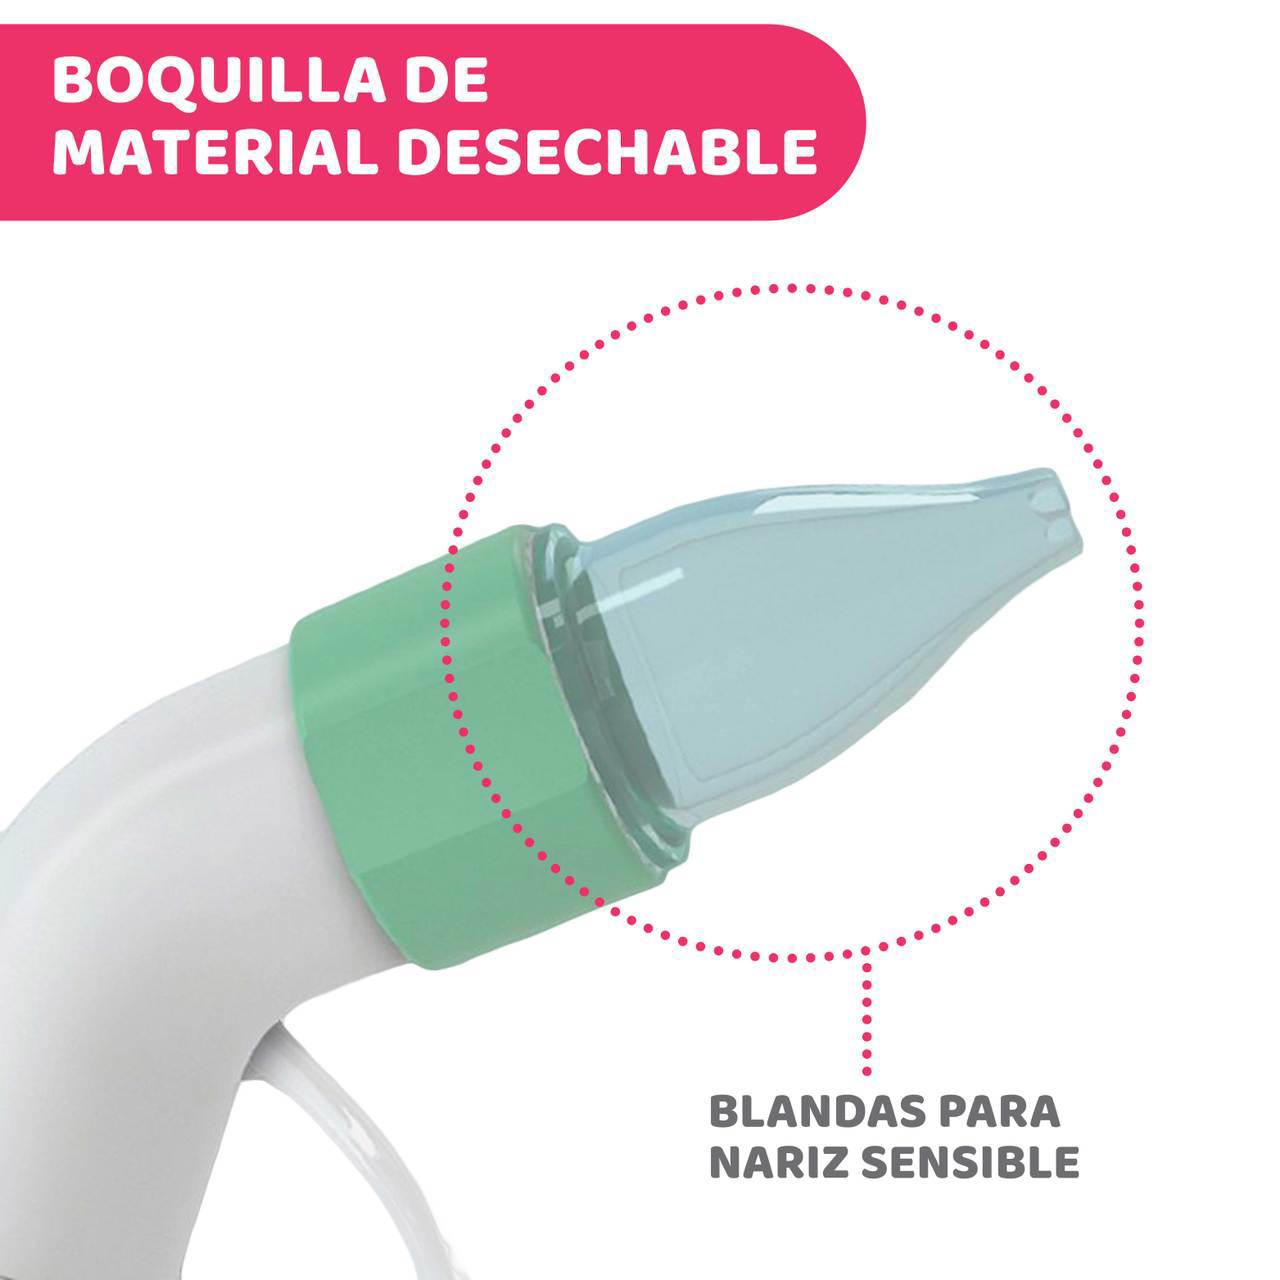 Aspirateur nasal PhysioClean Soft and Easy - Chicco - Lap'tite Grenouille